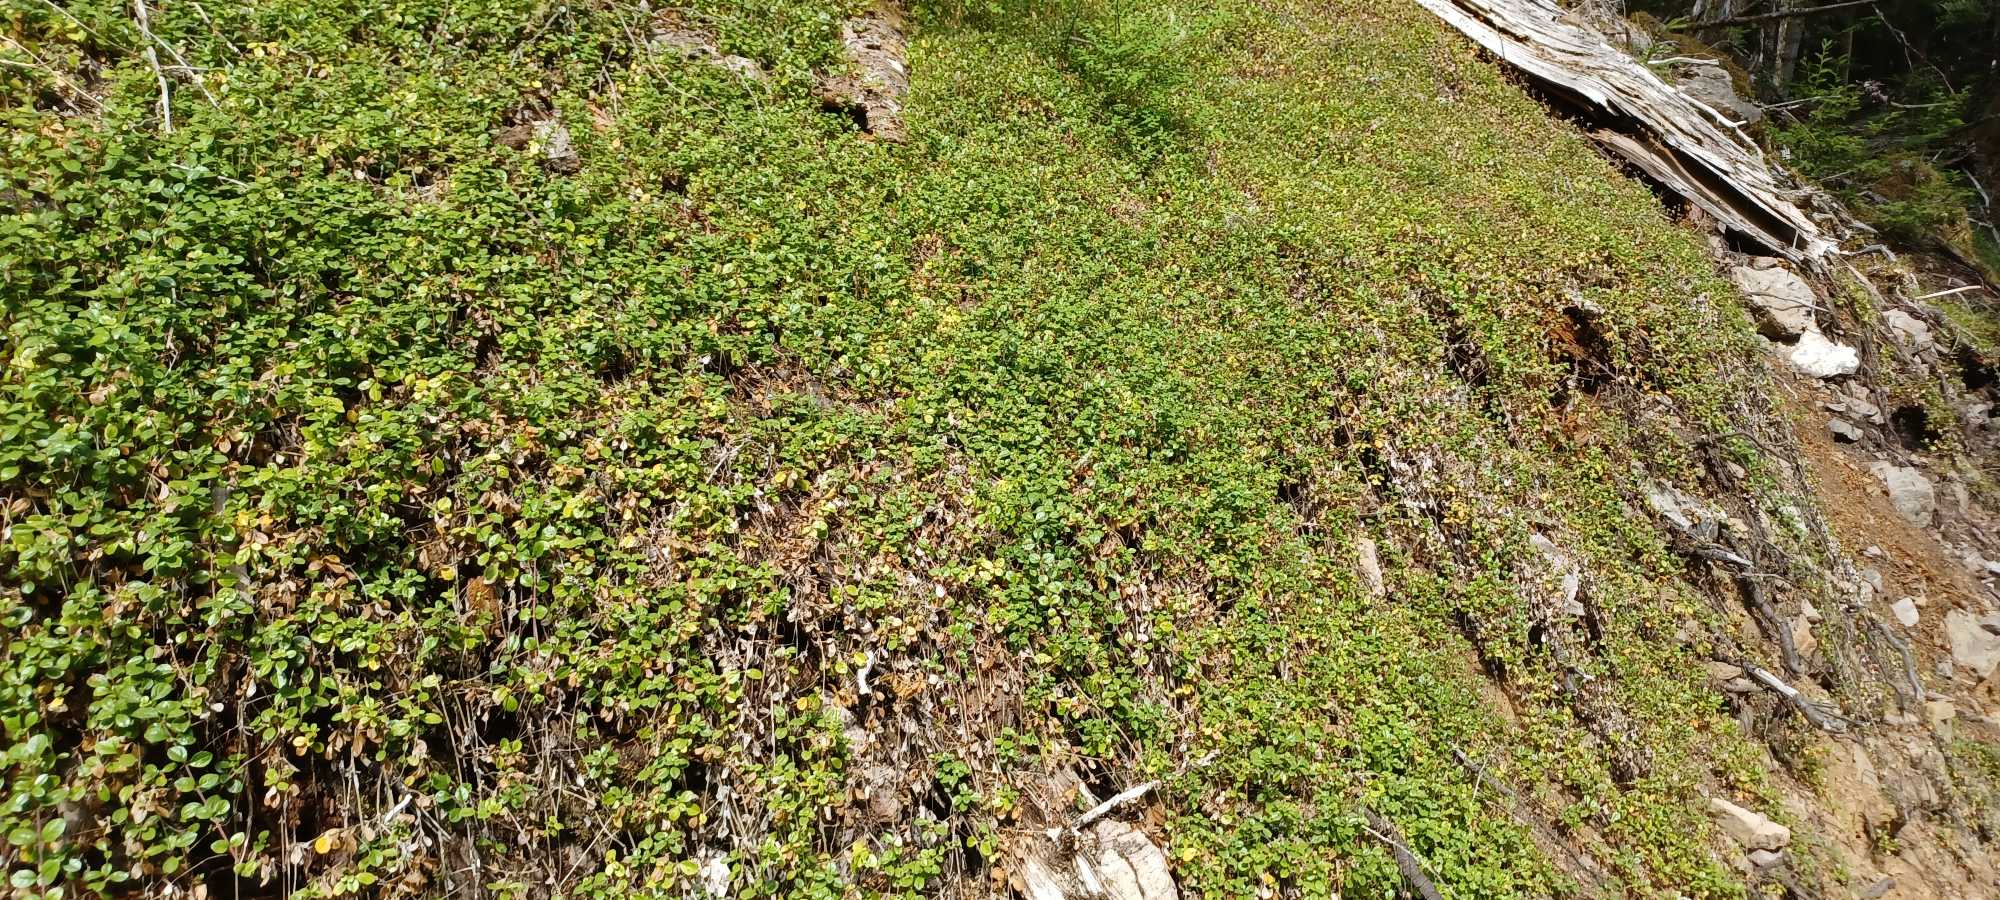 Linnaea borealis growing as a continuous ground cover in the wild.